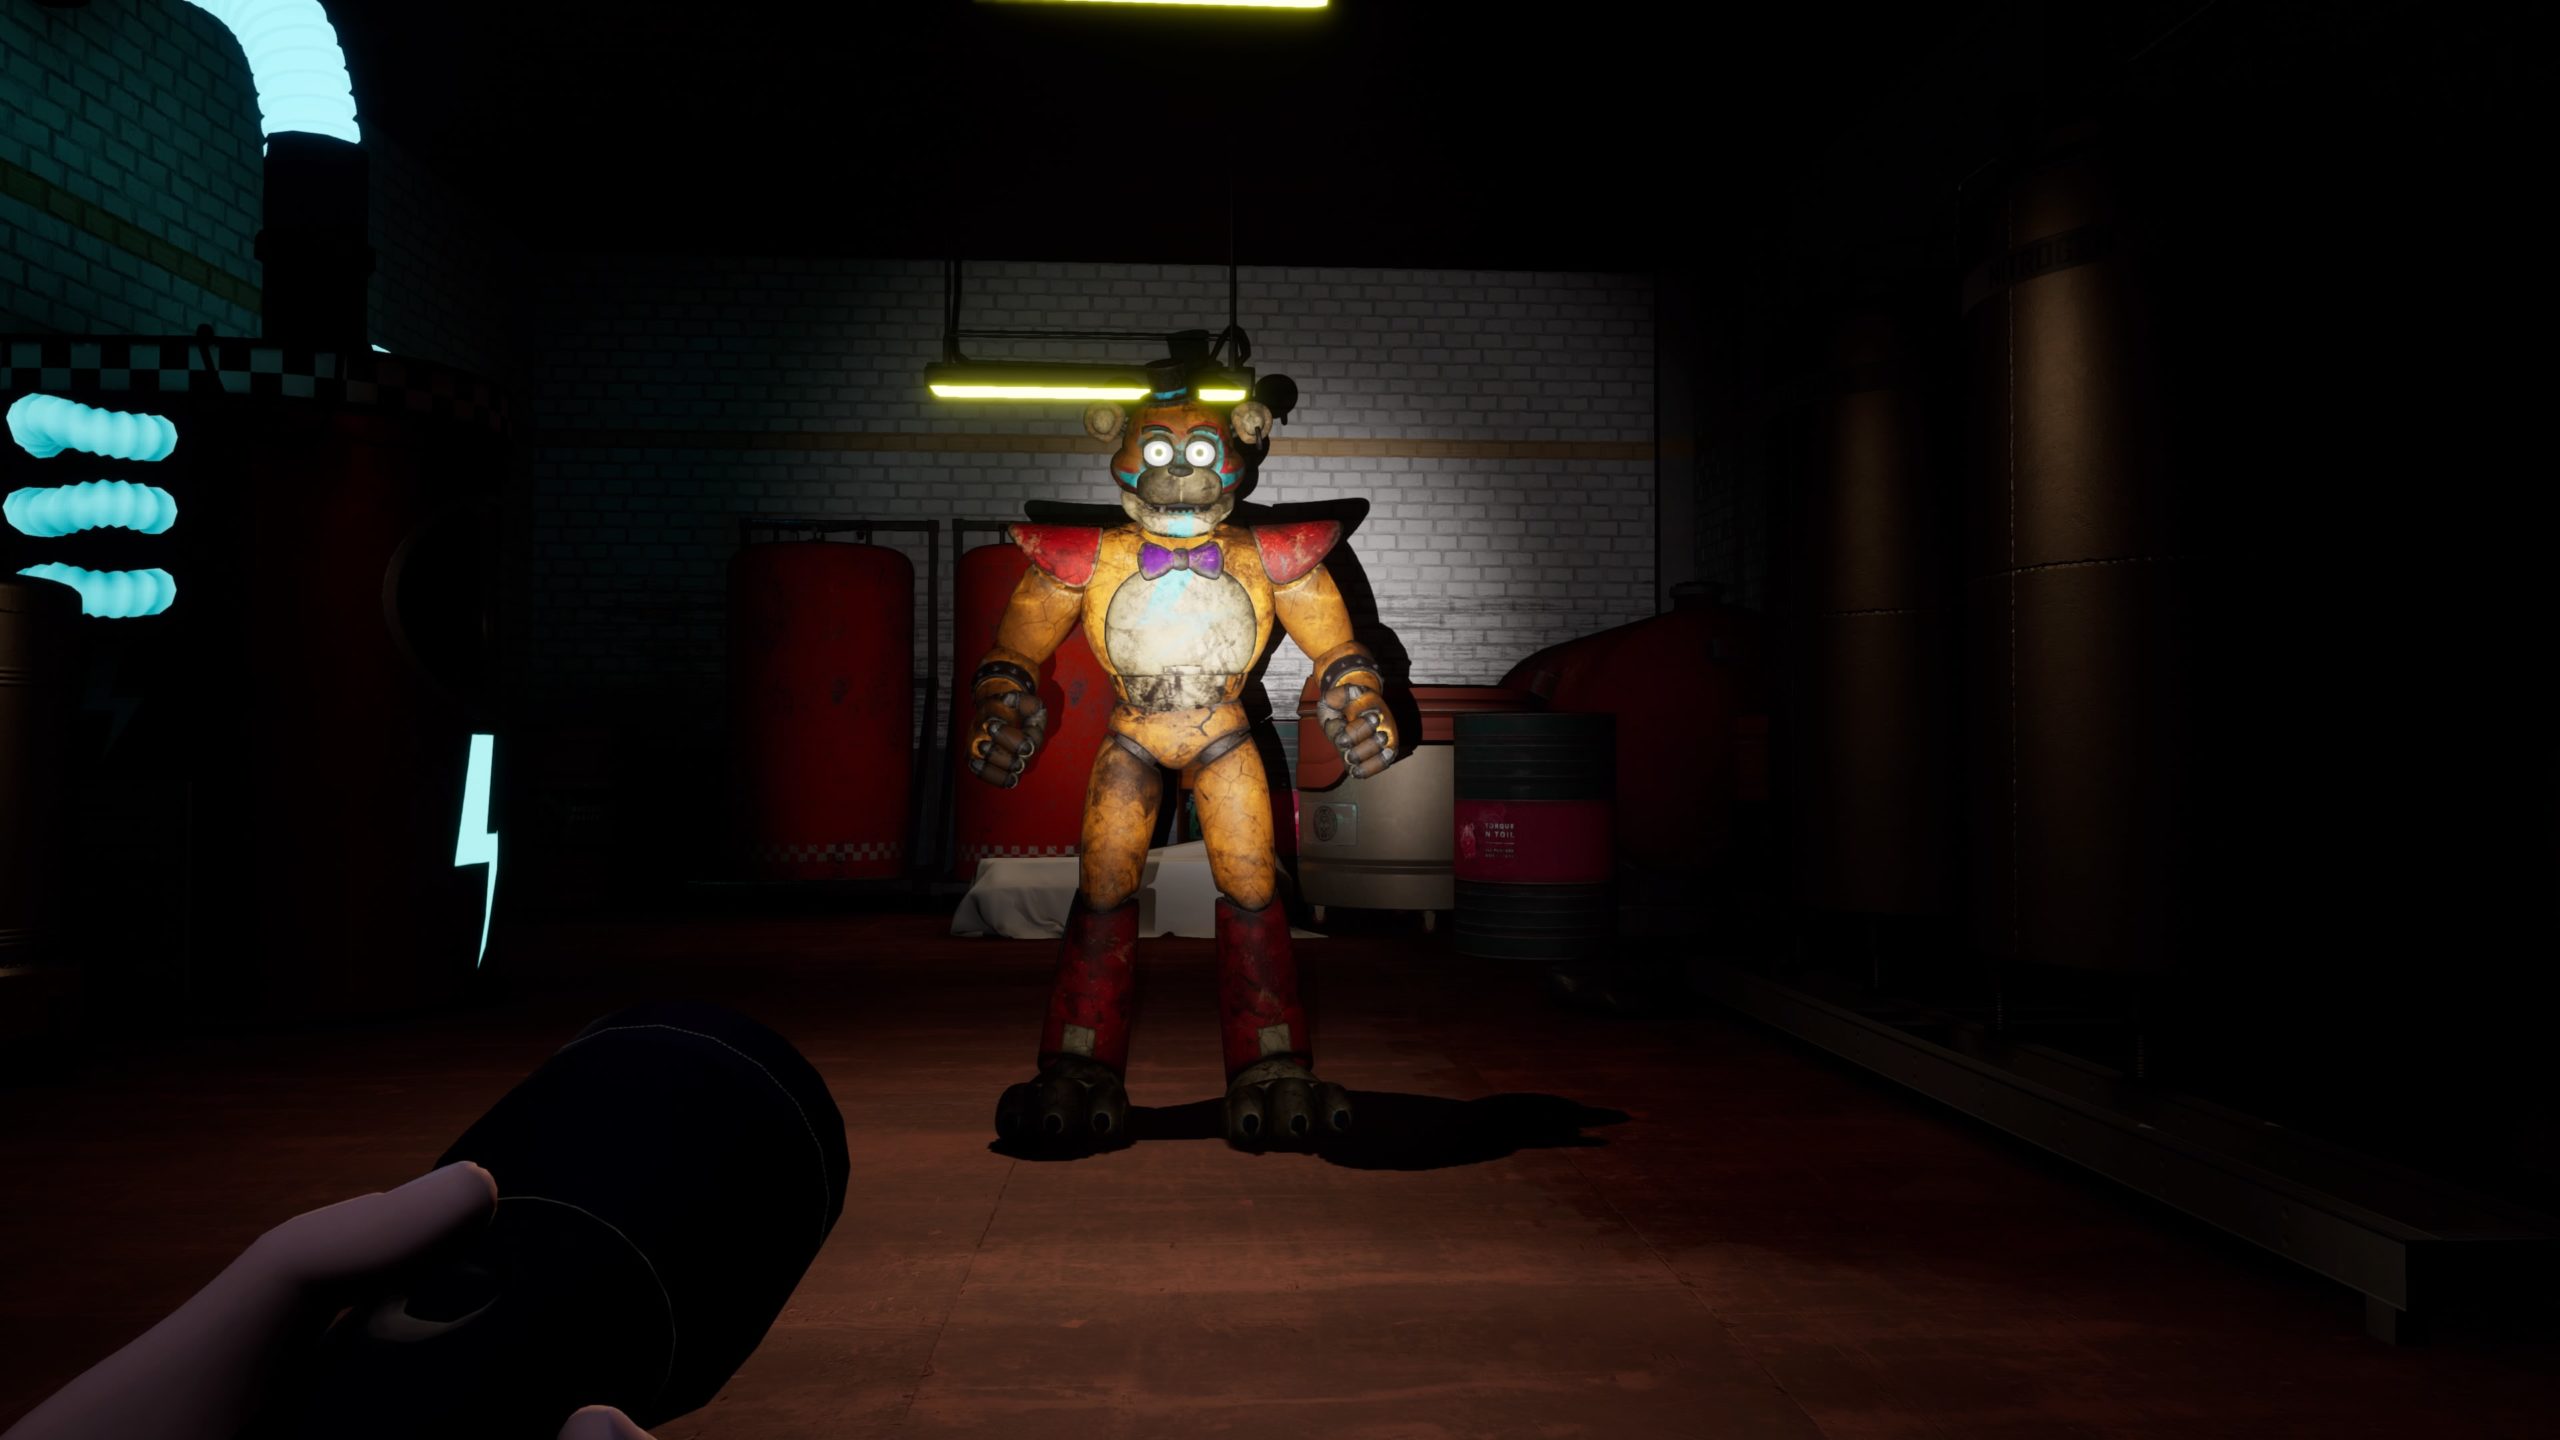 Five Nights At Freddys  Security Breach 20211222083850 Scaled 